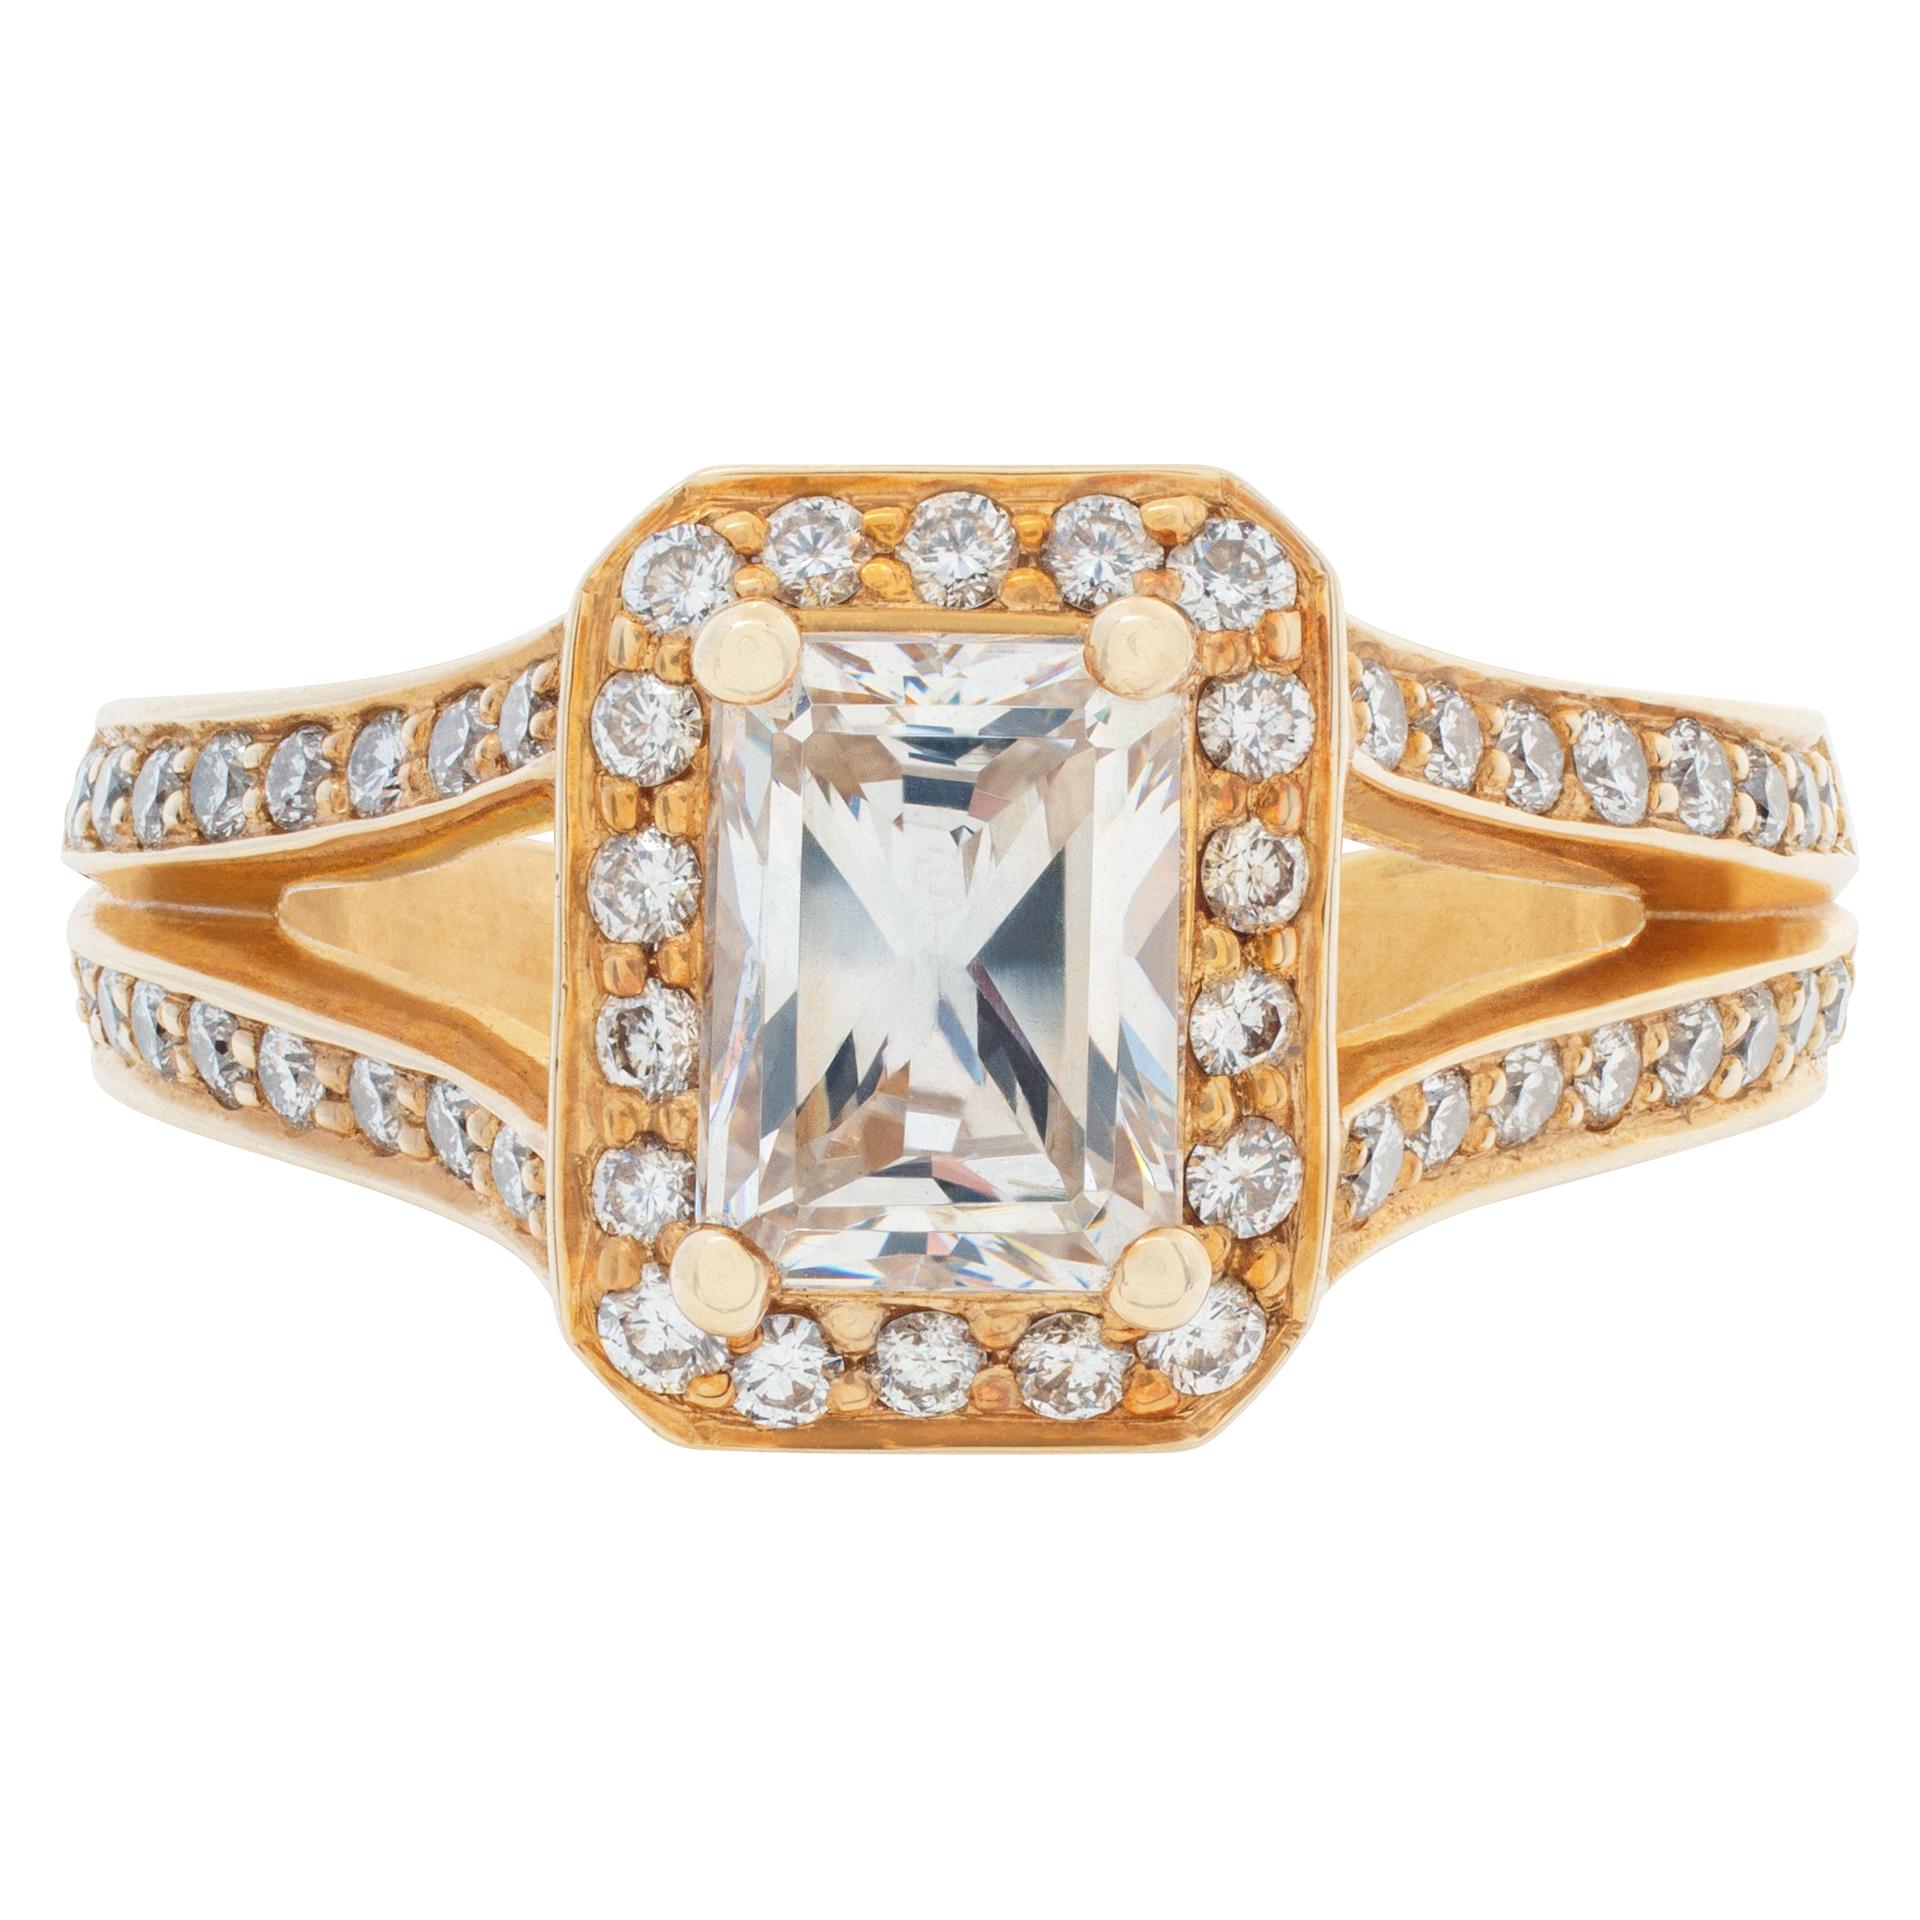 Diamond 14k gold ring setting with app. 0.64 cts of diamonds. Shown with center CZ.<br /><br />This Diamond ring is currently size 7 and some items can be sized up or down, please ask! It weighs 3.8 pennyweights and is 14k.
